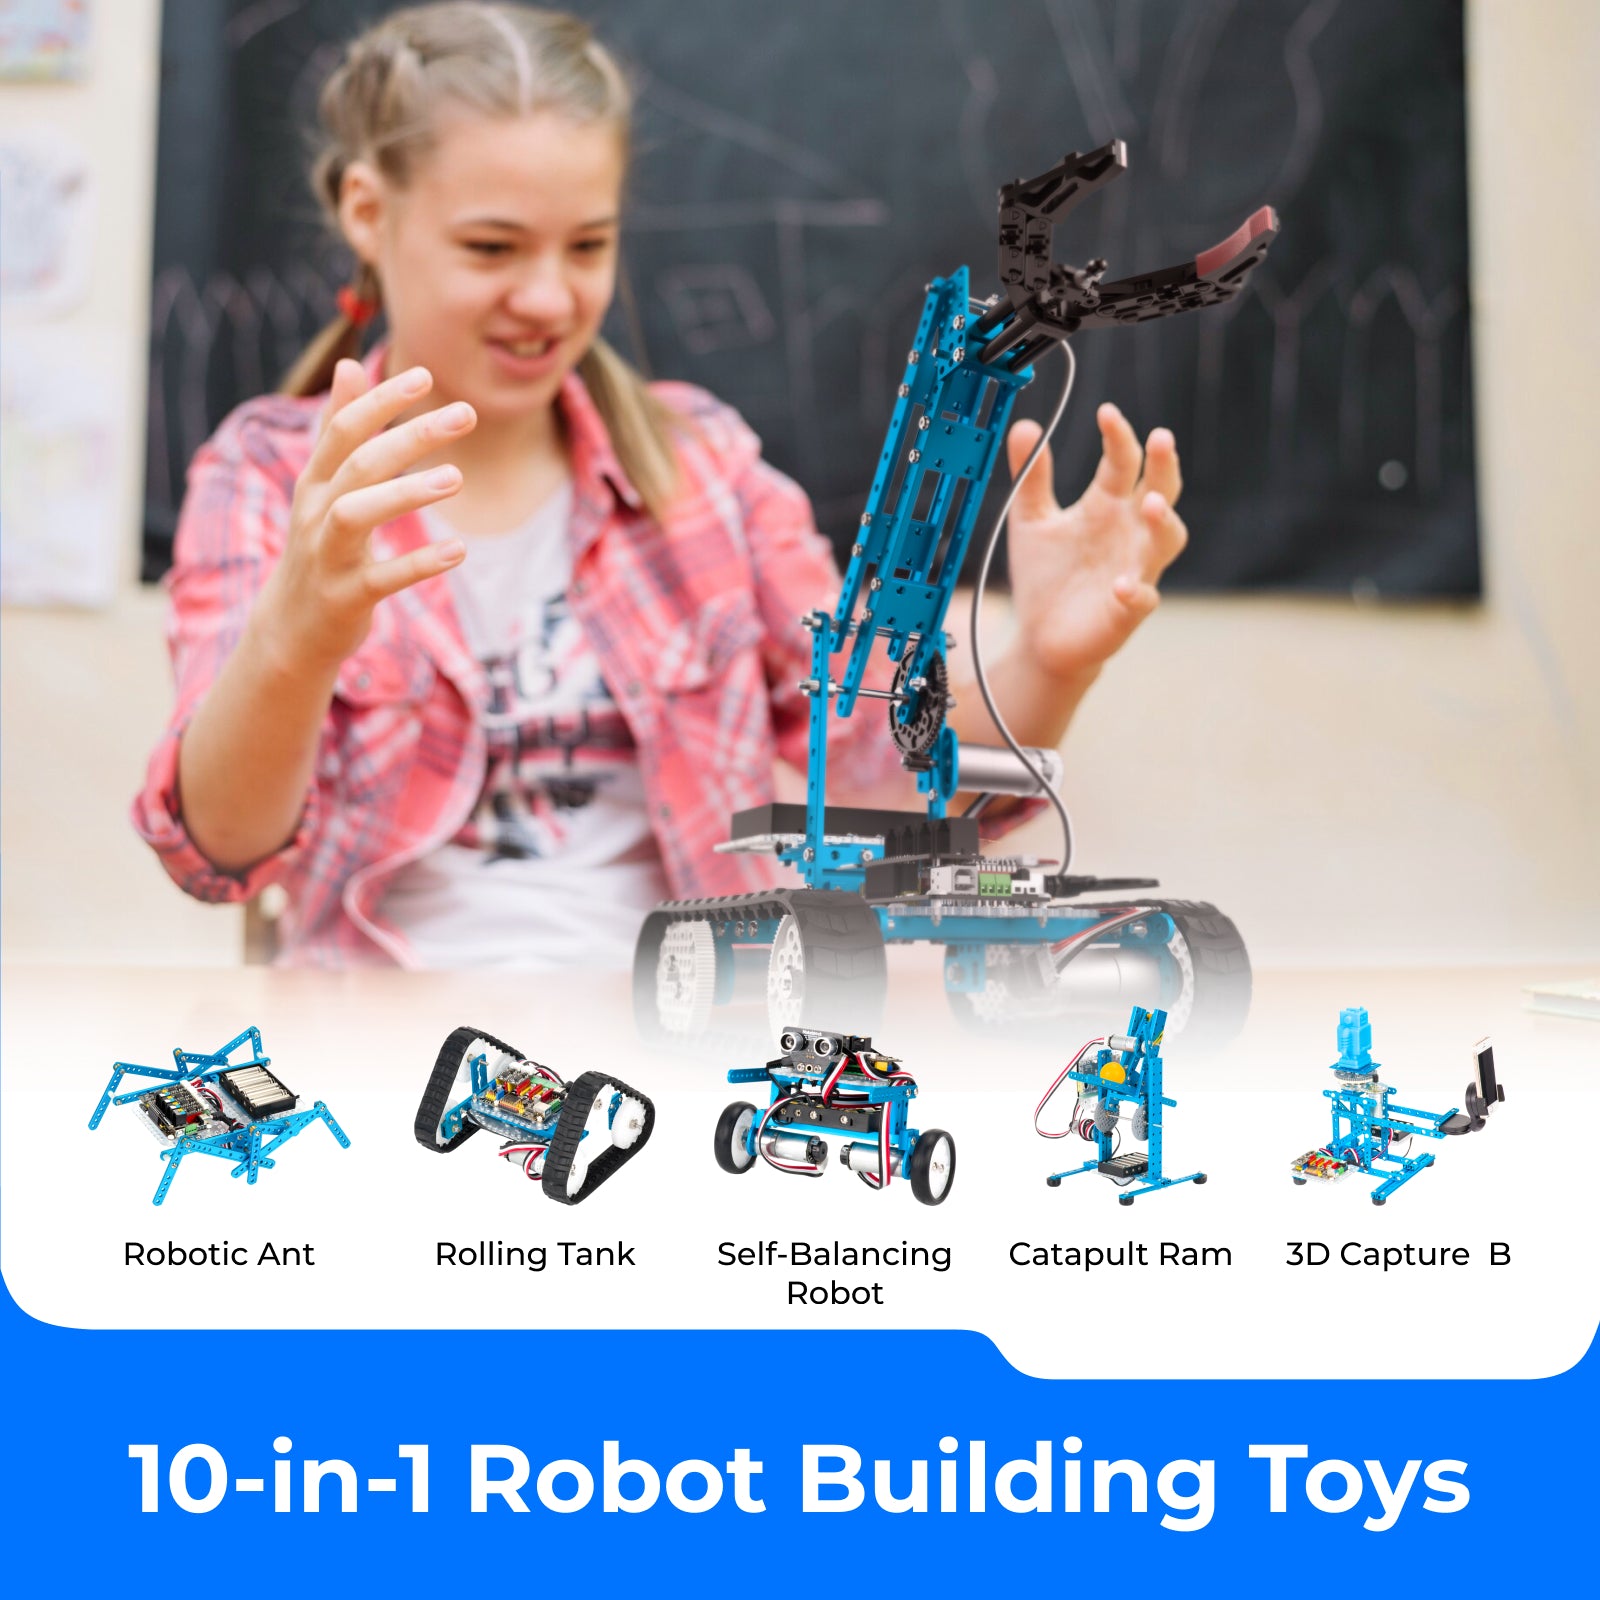 10-in-1 Robot Building Toys